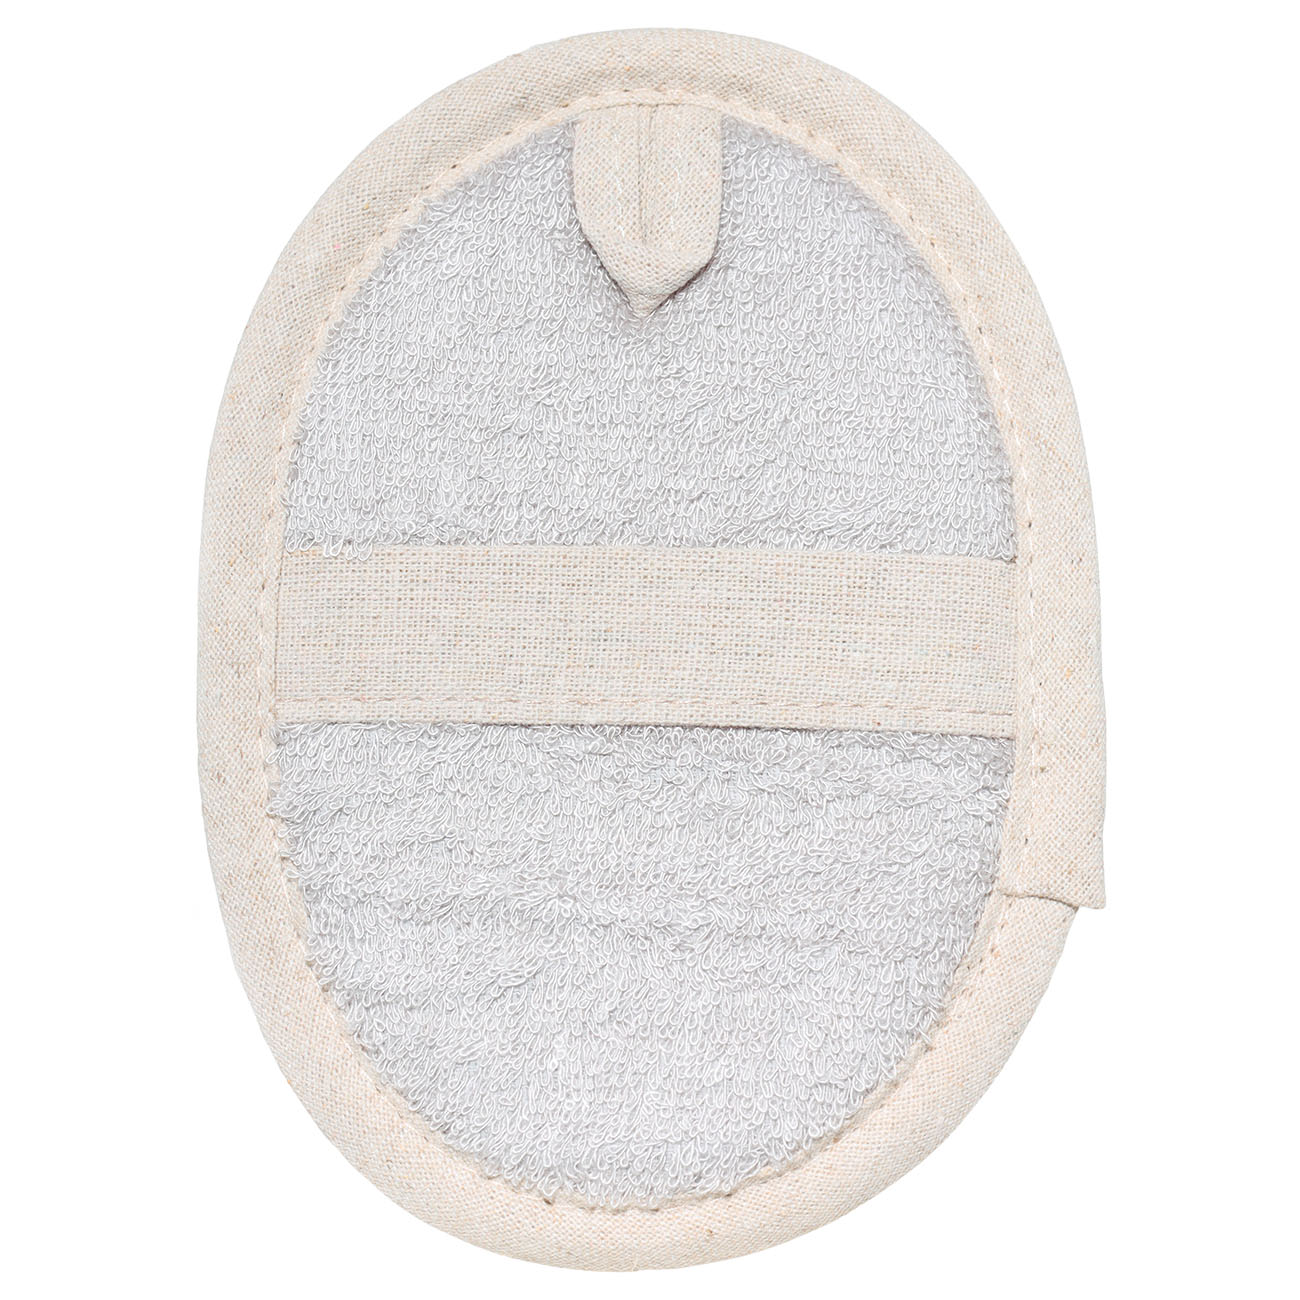 Body washcloth, 12x17 cm, with holder, bamboo / cotton, gray-beige, Bamboo spa изображение № 2